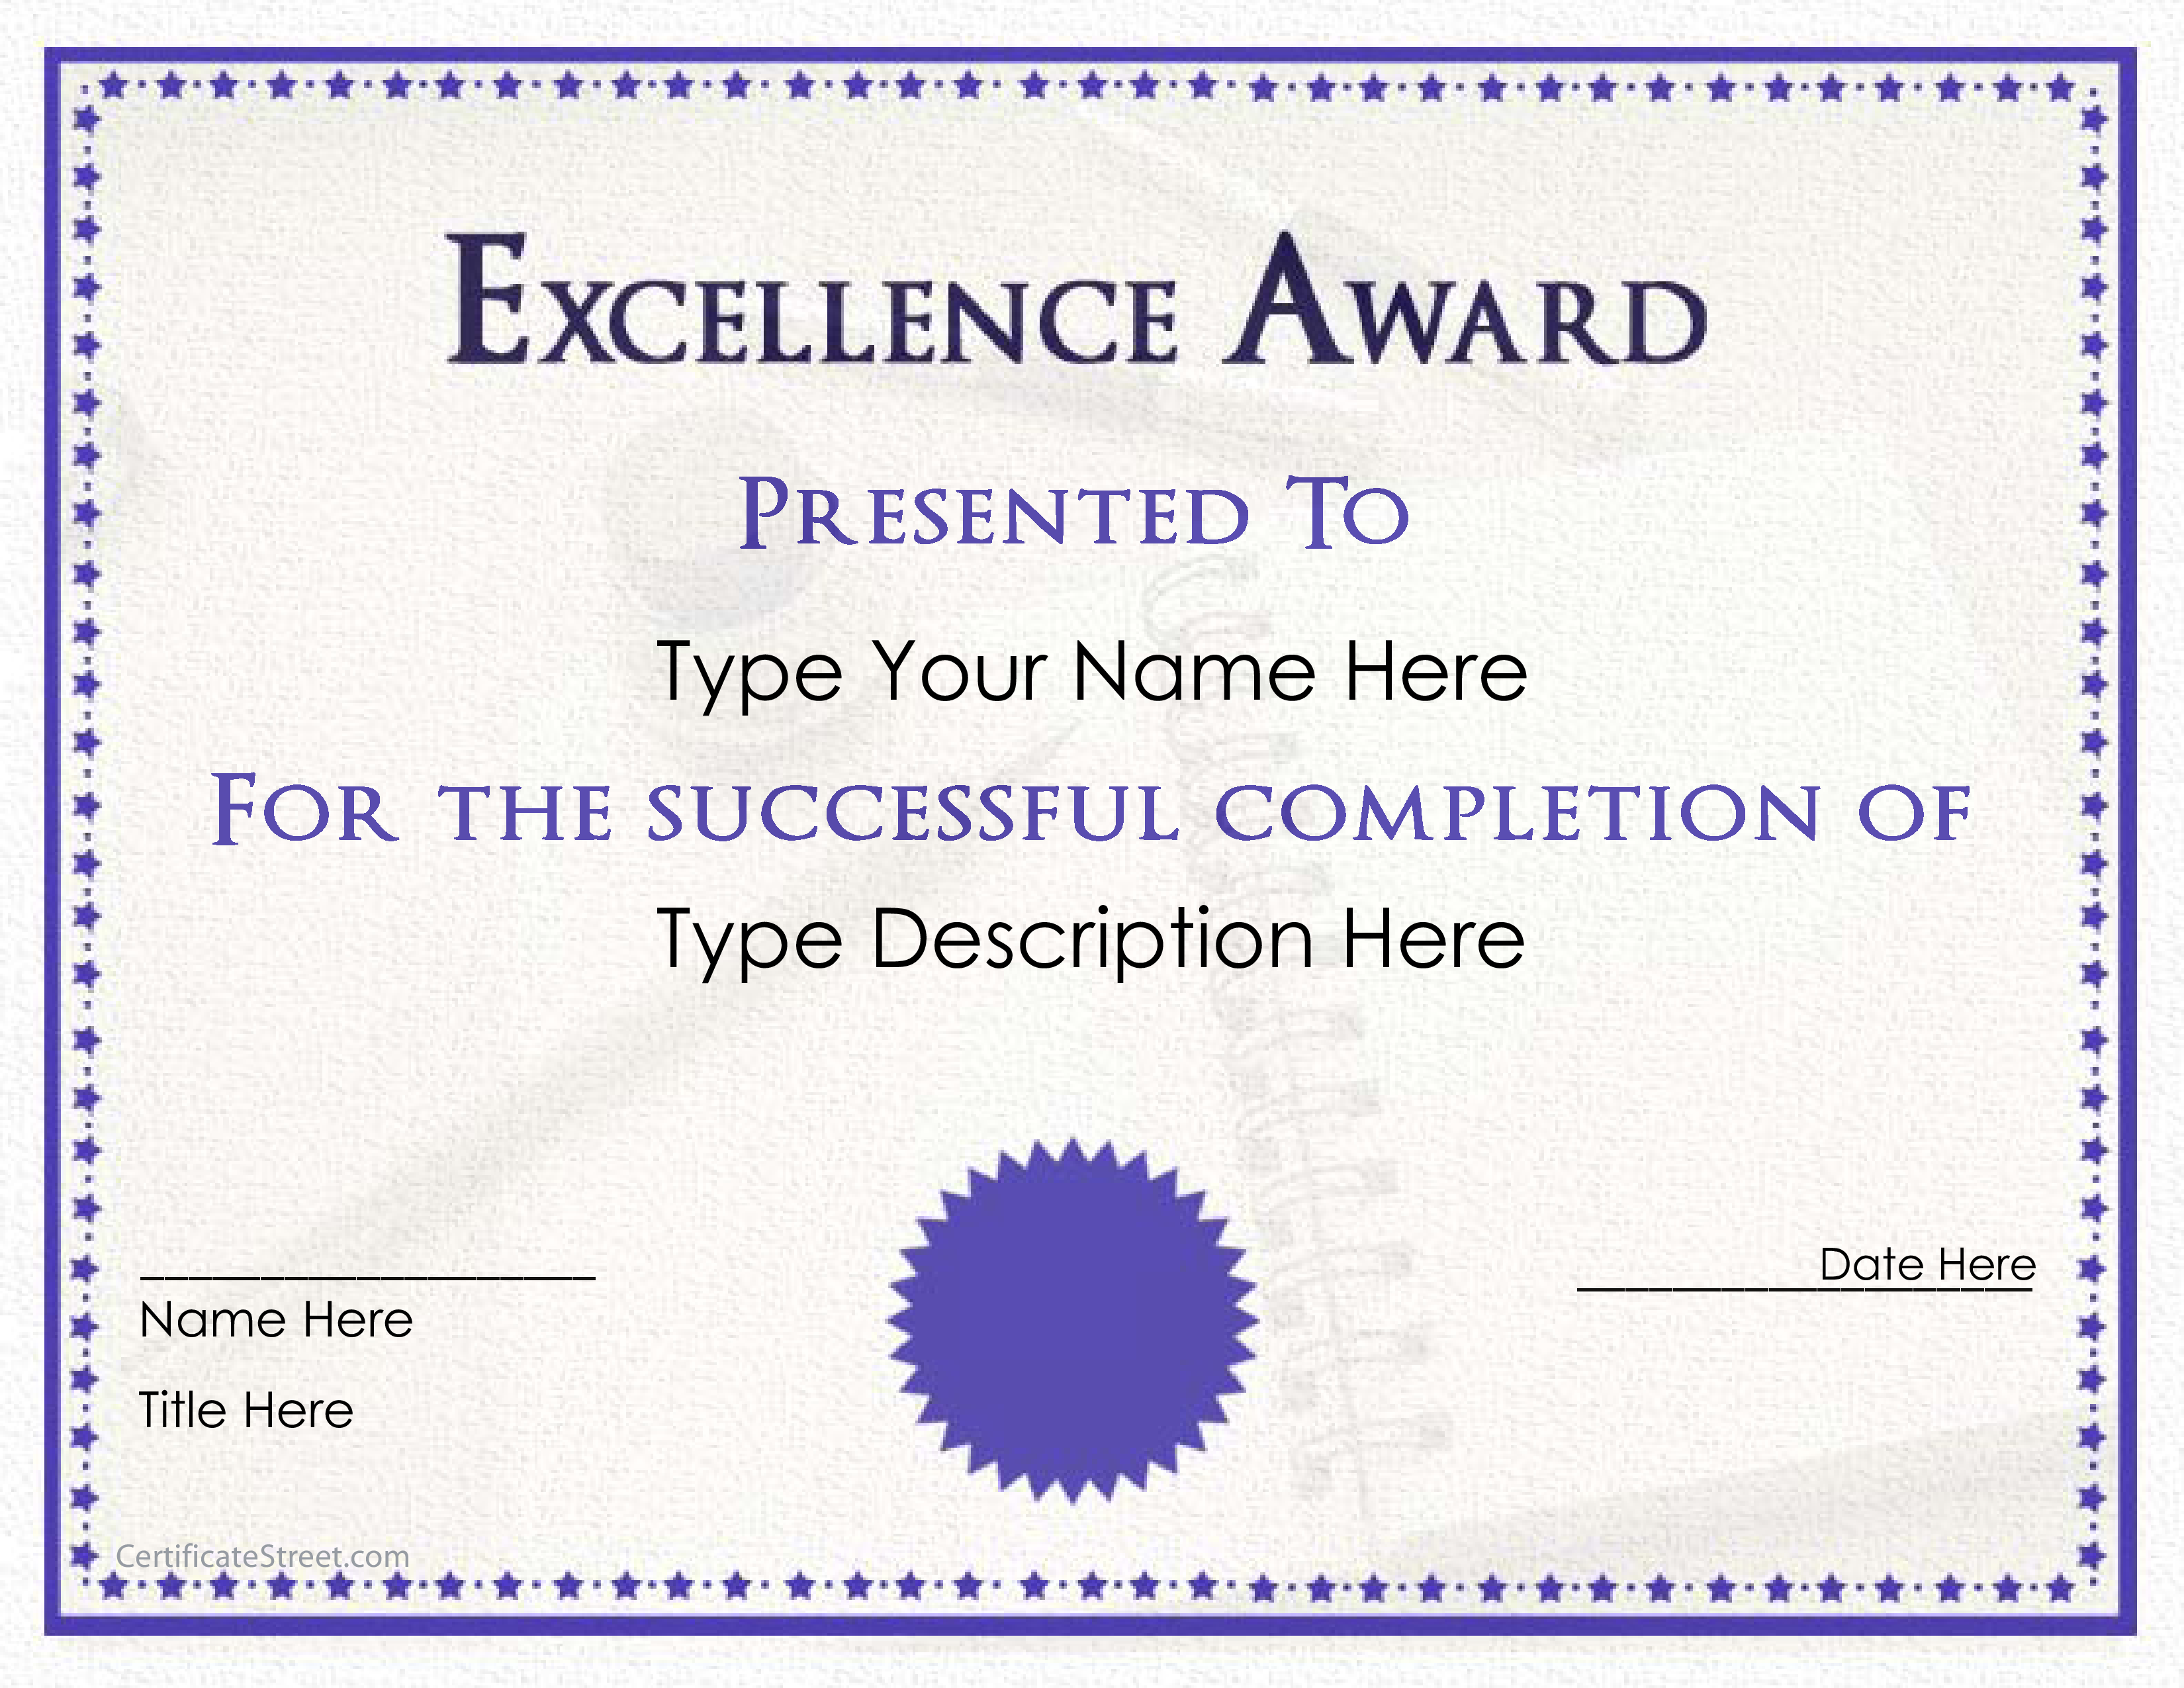 Excellence Award Certificate Templates at allbusinesstemplates com